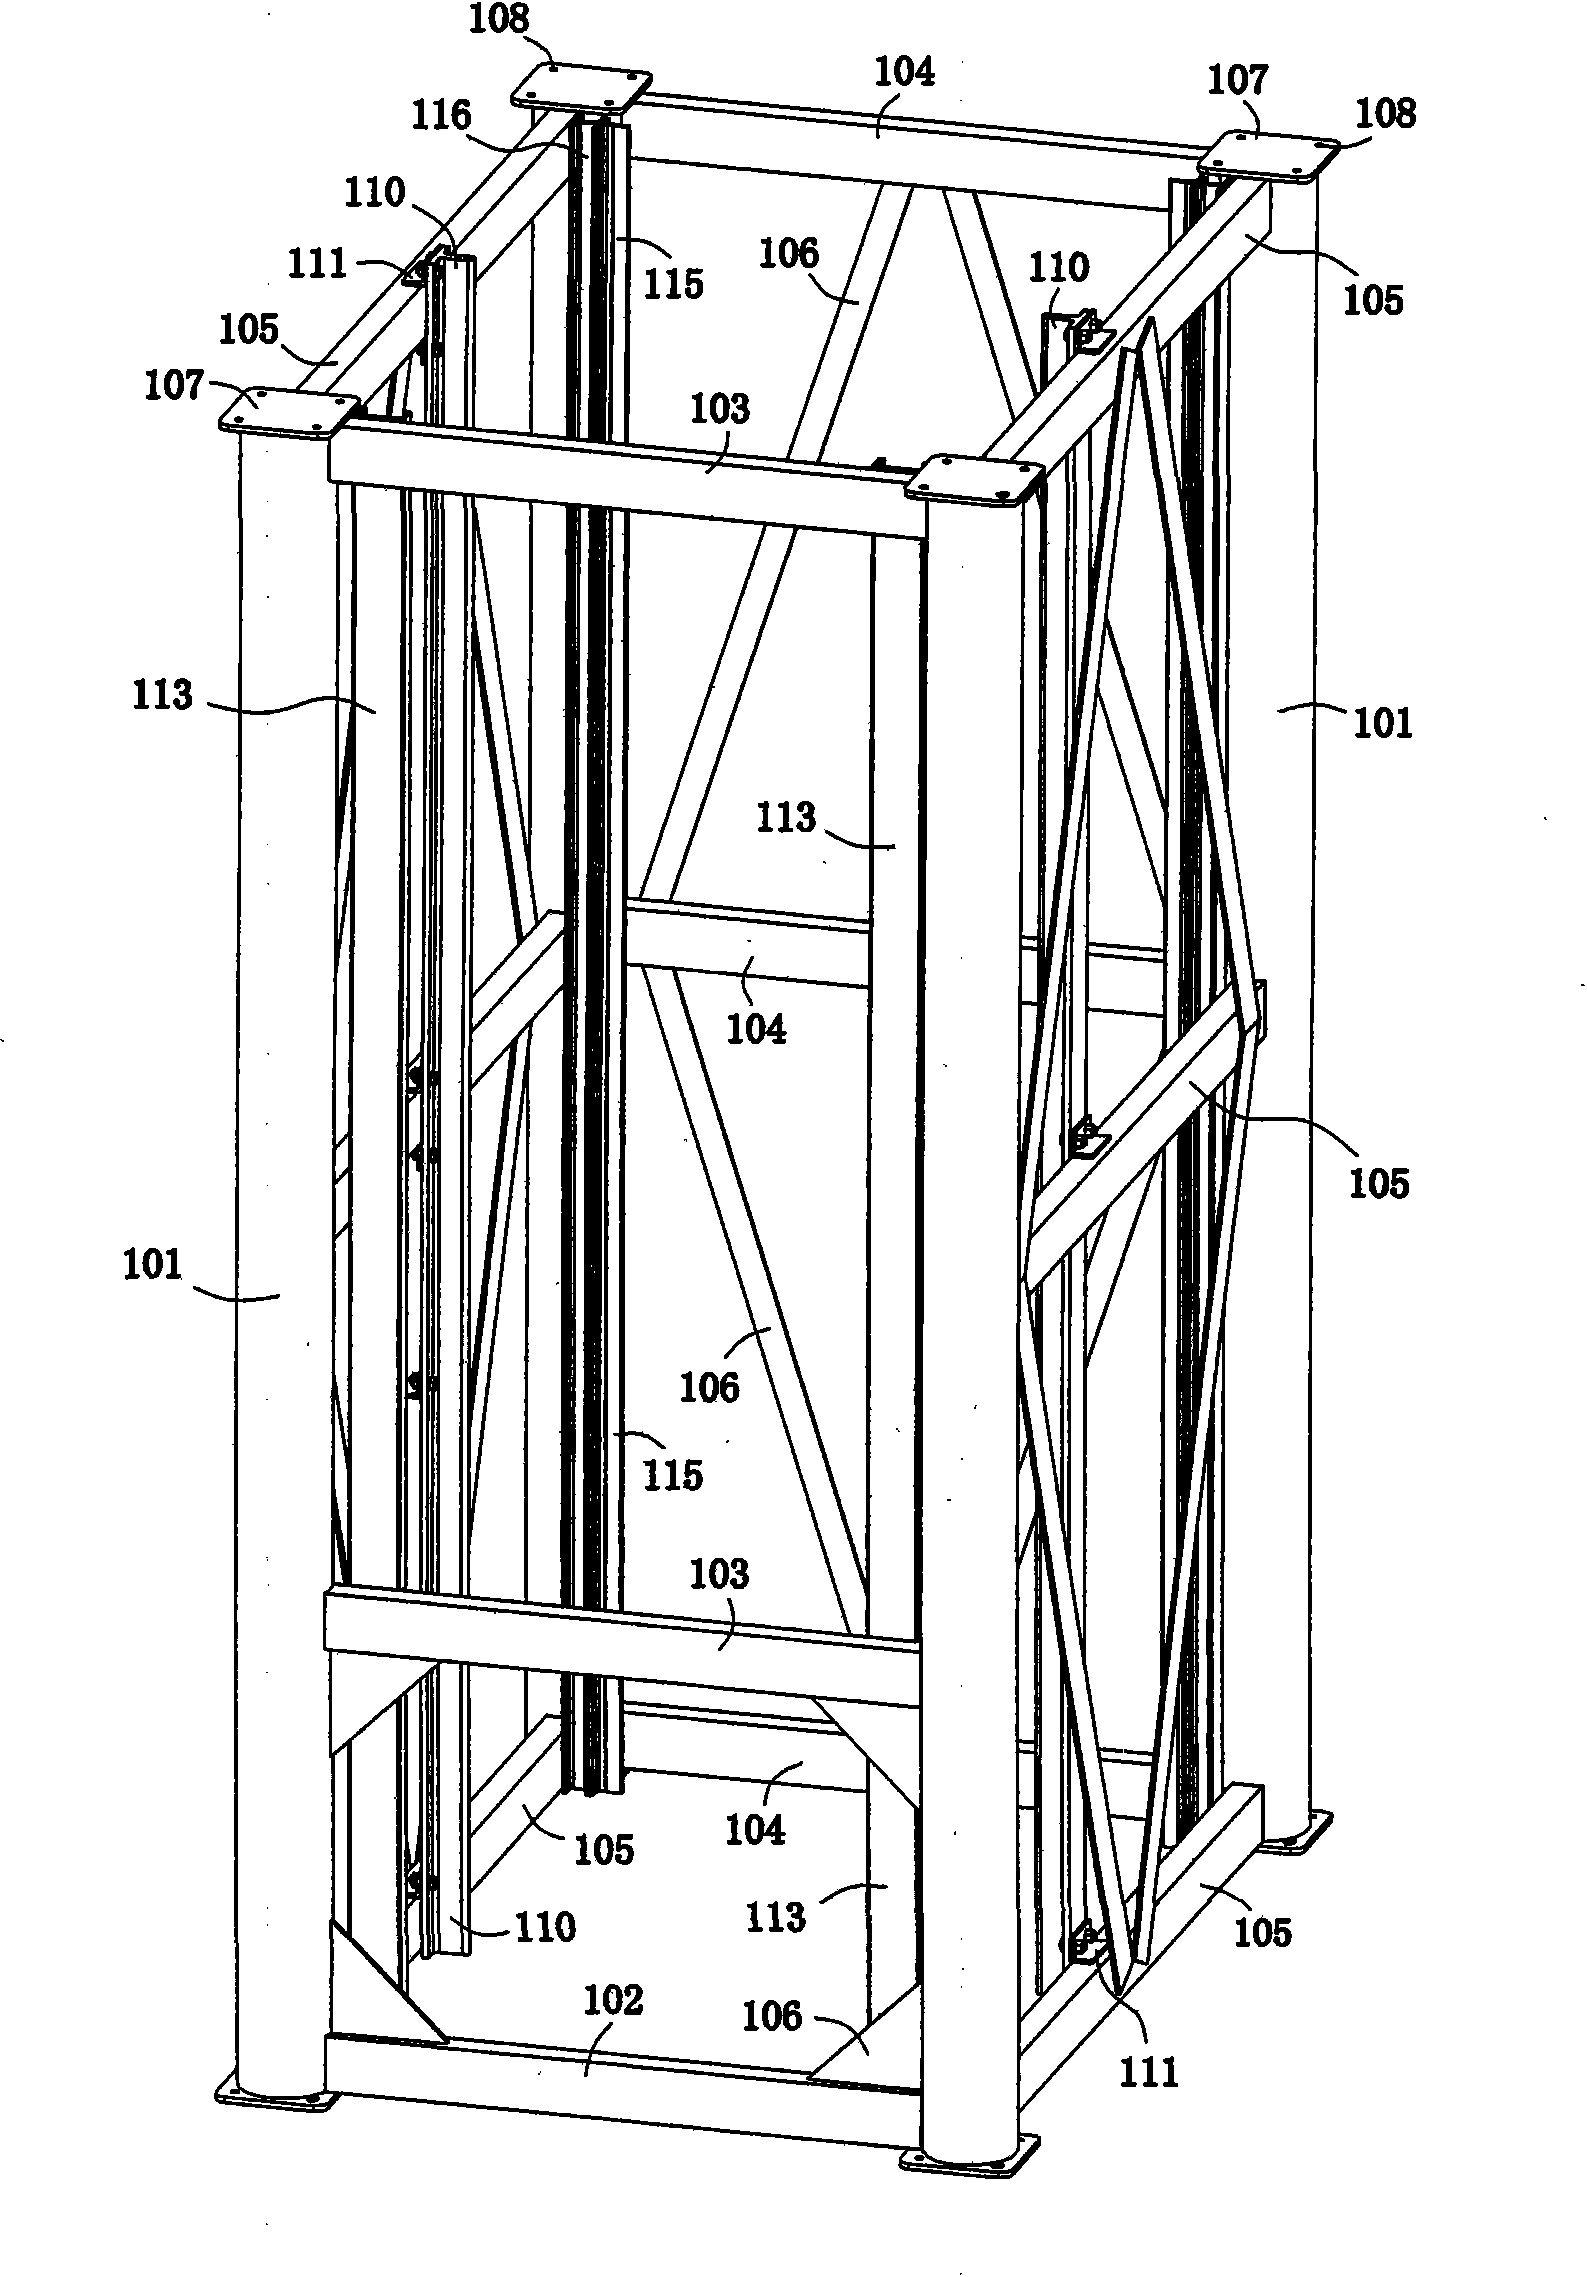 Elevator assembled by utilizing combination type derrick